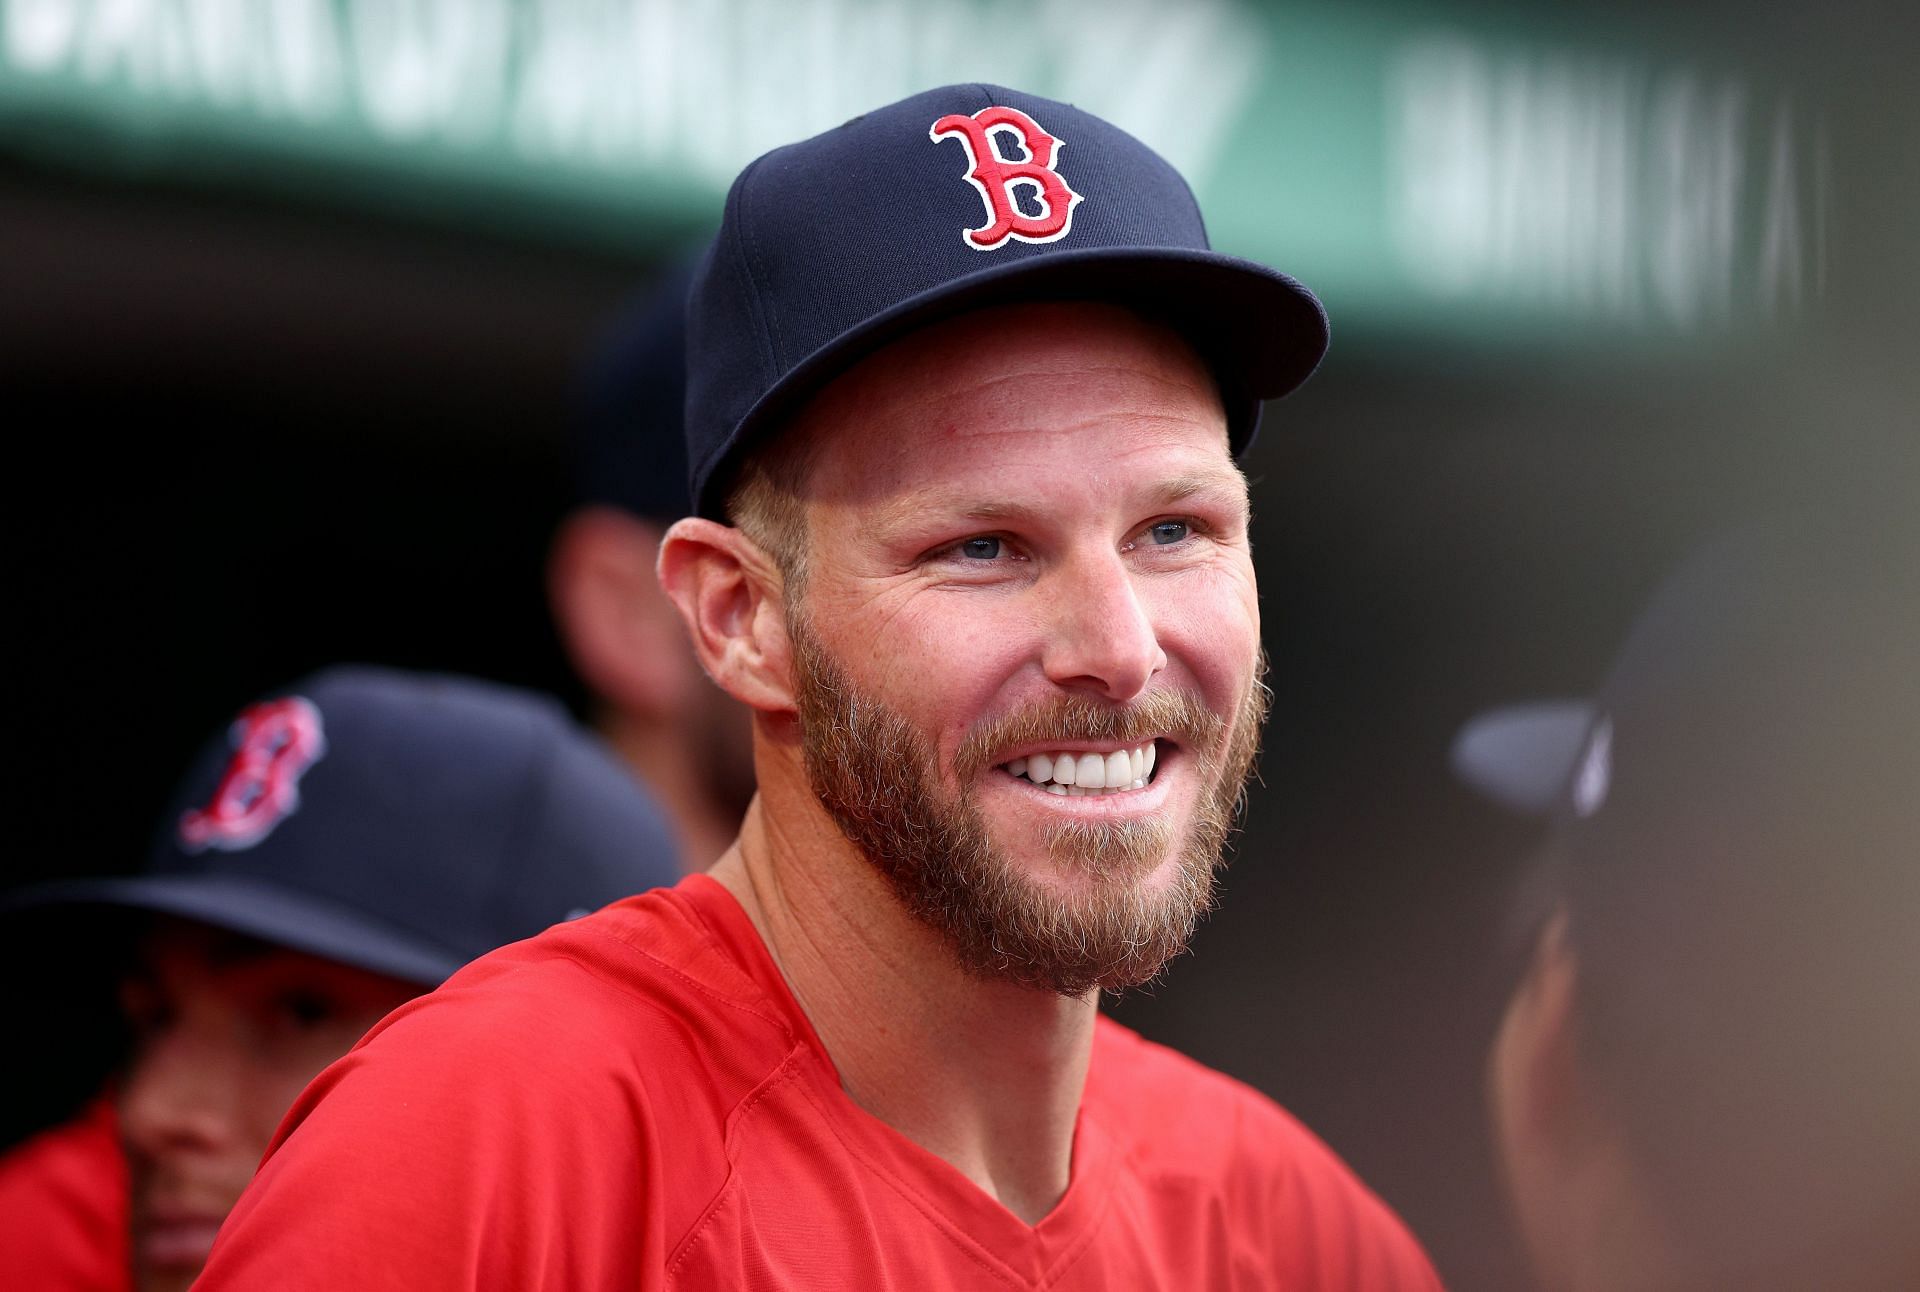 Chris Sale beats up Gatorade cooler in dugout after poor outing